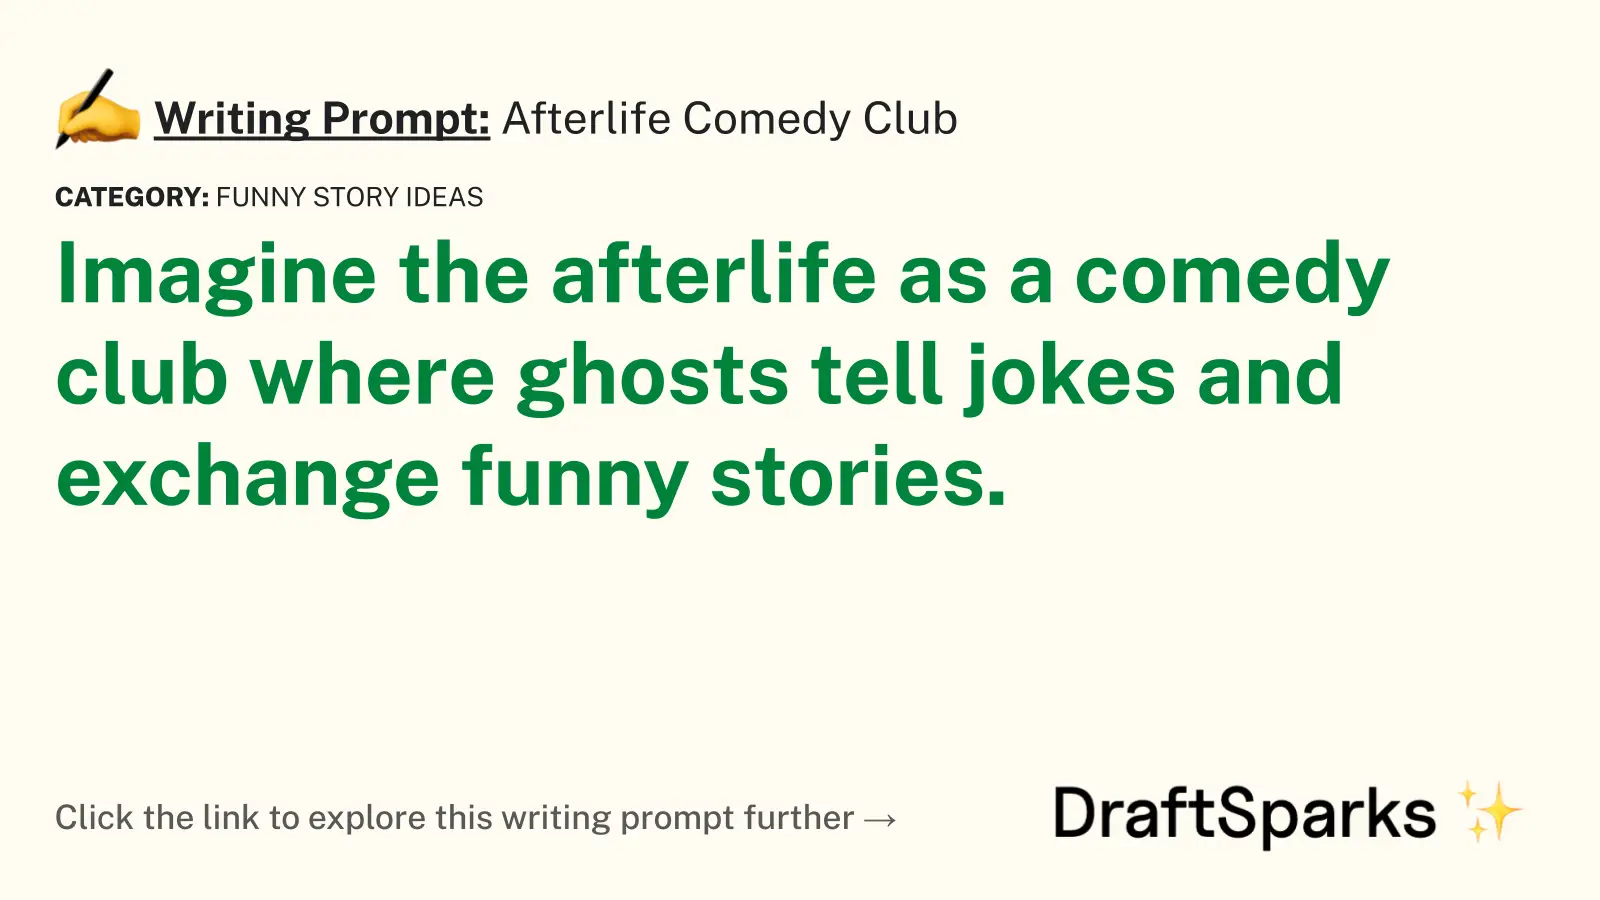 Afterlife Comedy Club